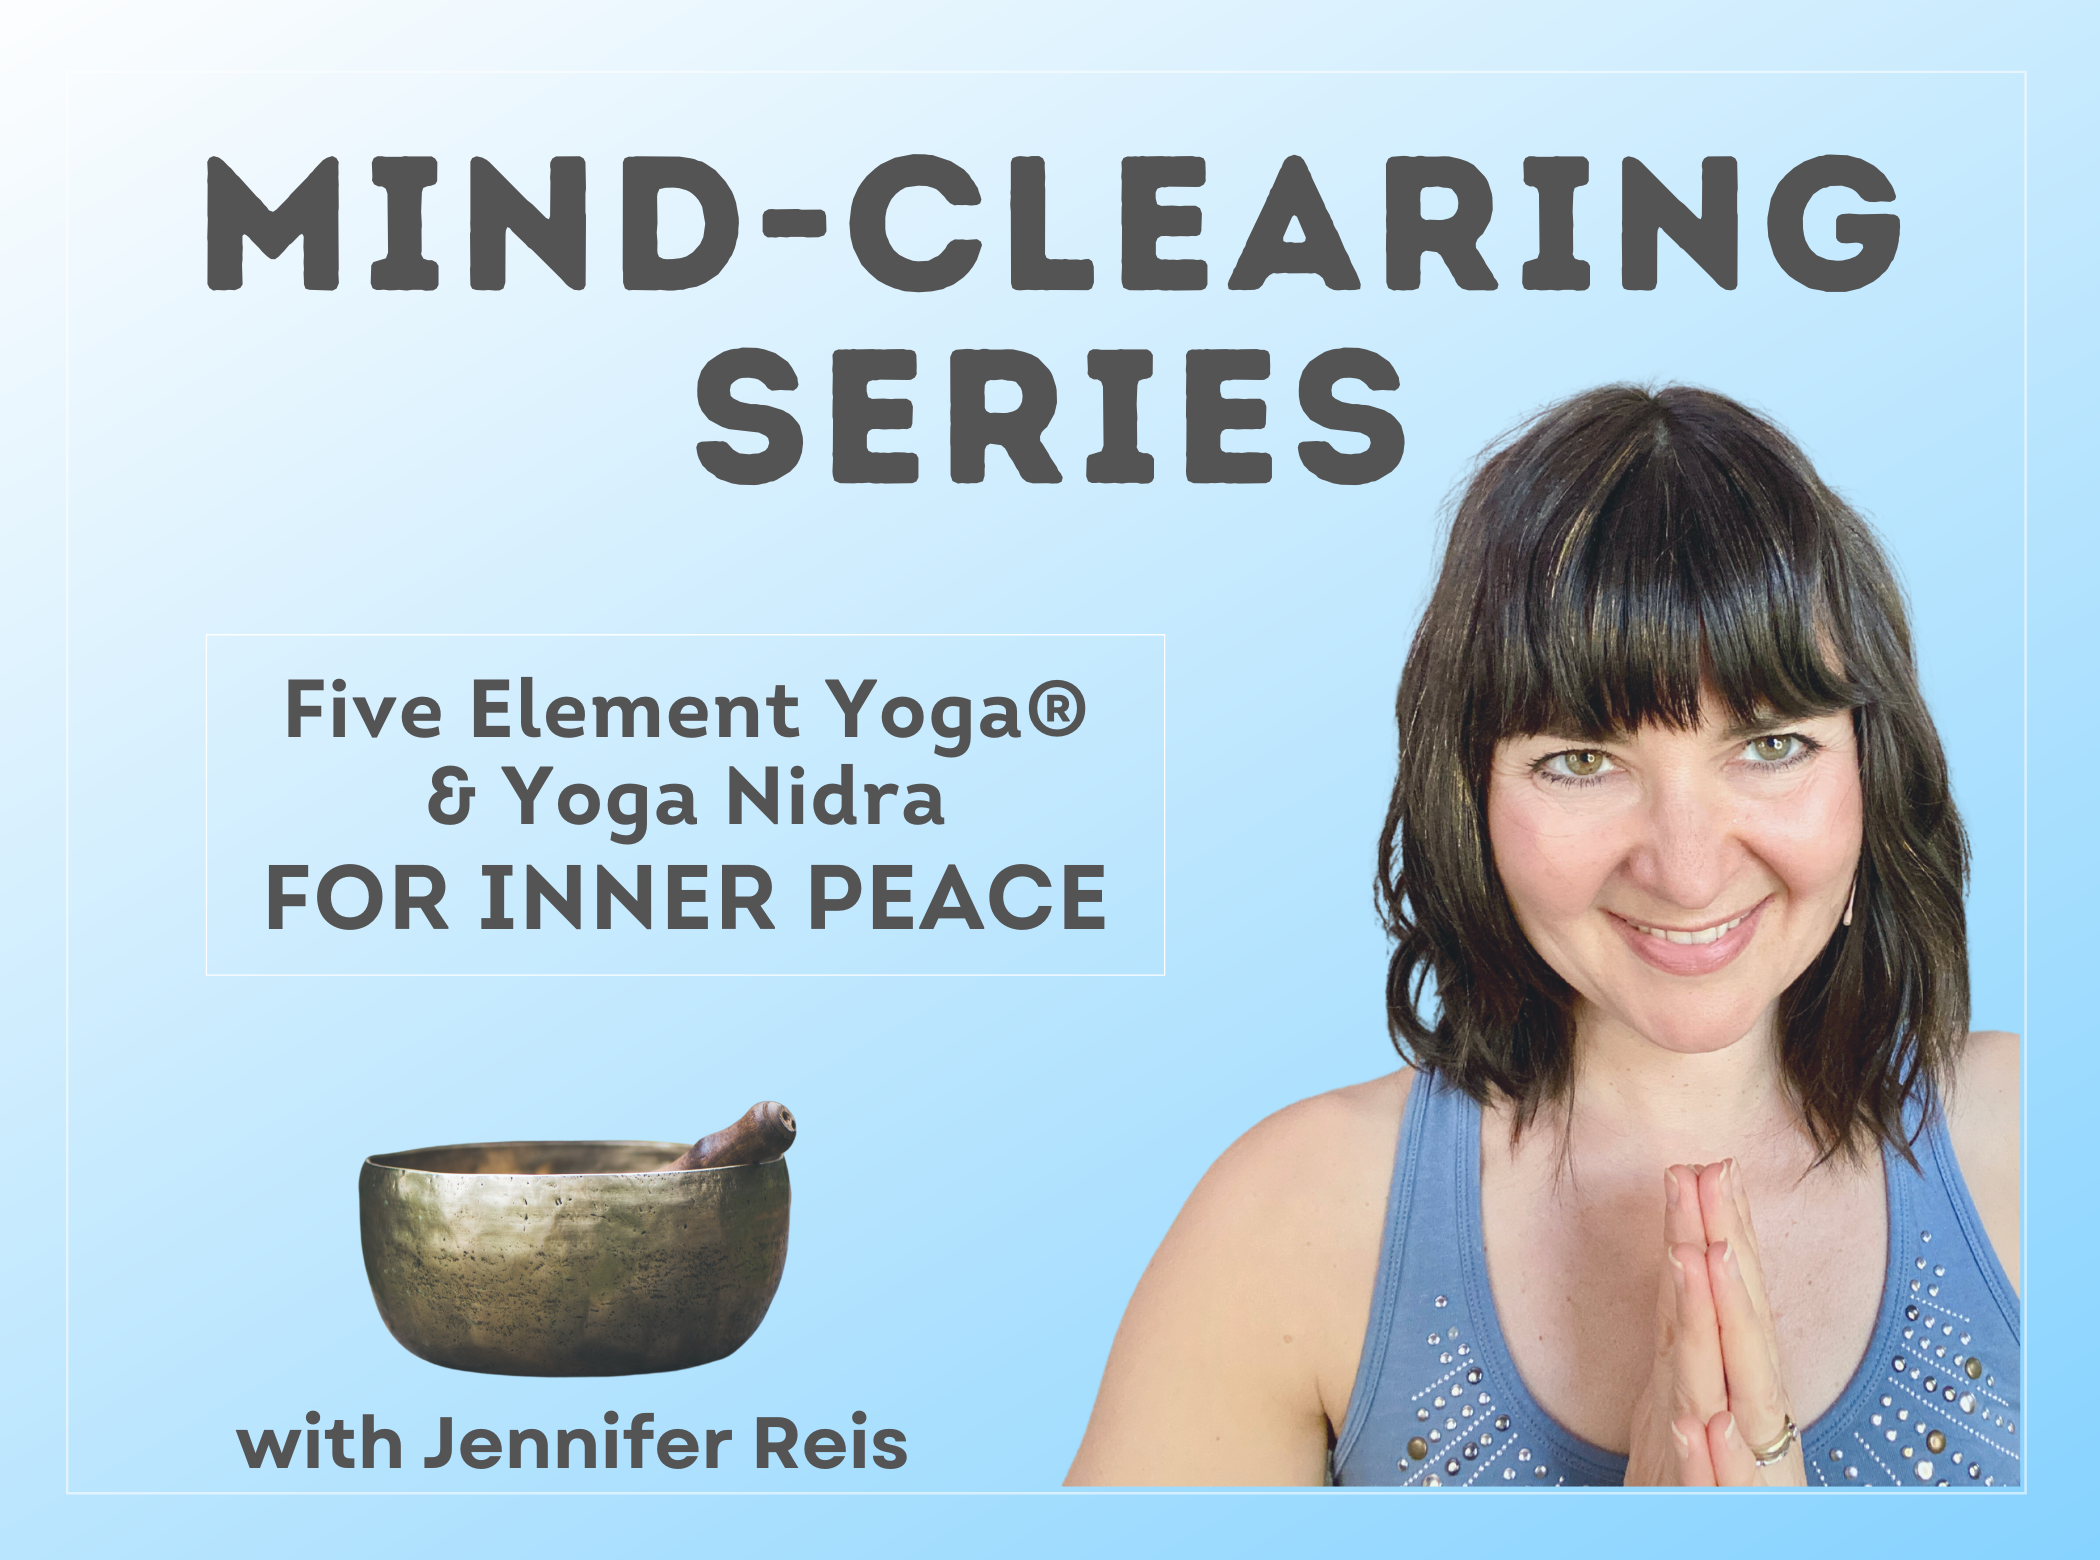 MIND-CLEARING SERIES: Five Element Yoga® and Yoga Nidra for Inner Peace ...